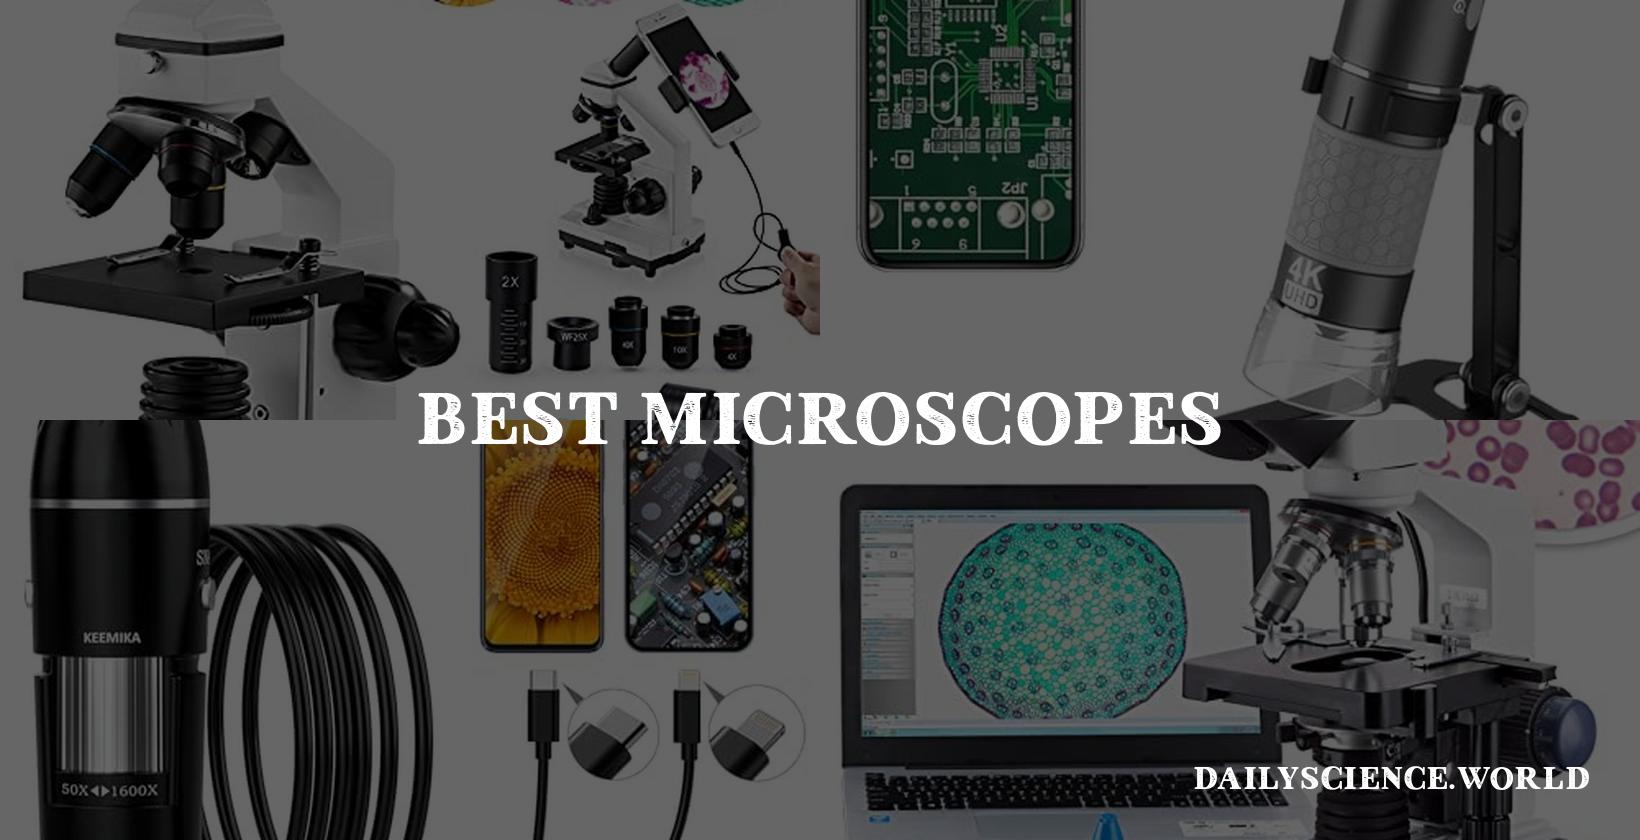 Picking the best microscope